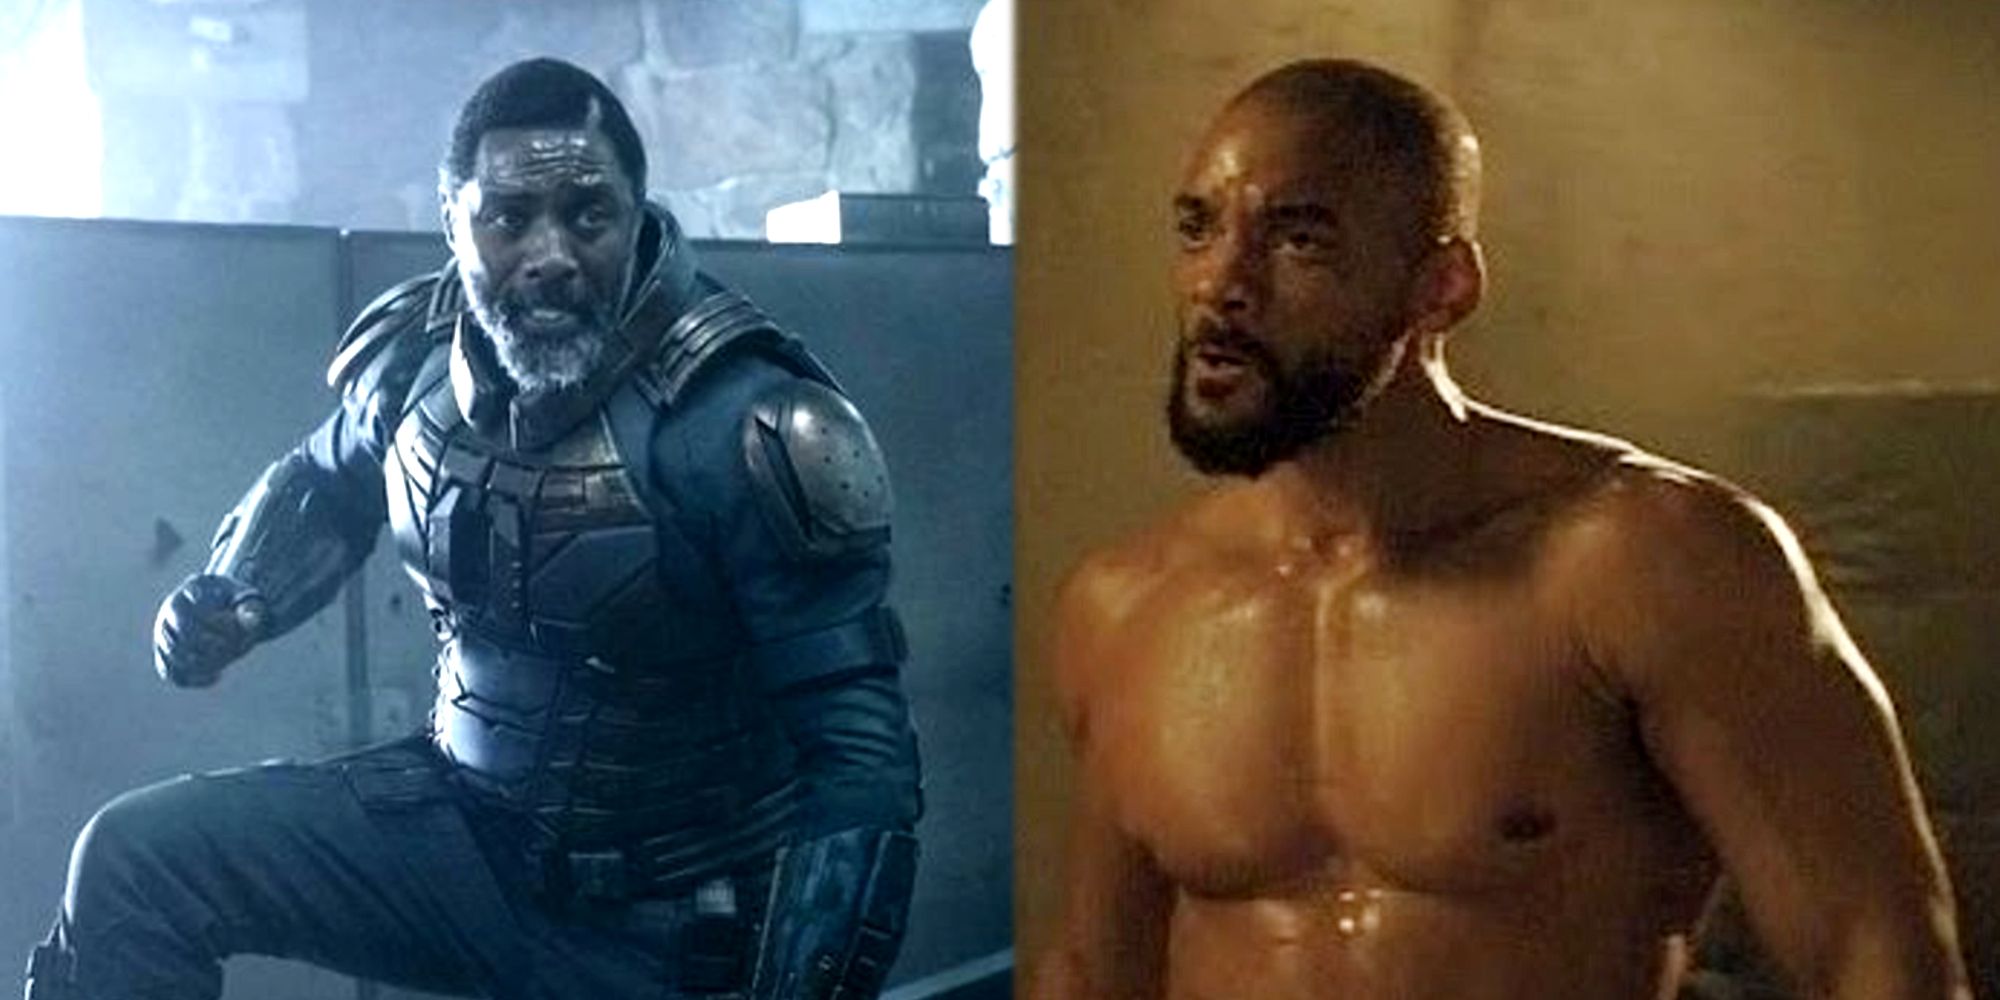 Idris Elba as Bloodsport and Will Smith as Deadshot in The Suicide Squad Movies